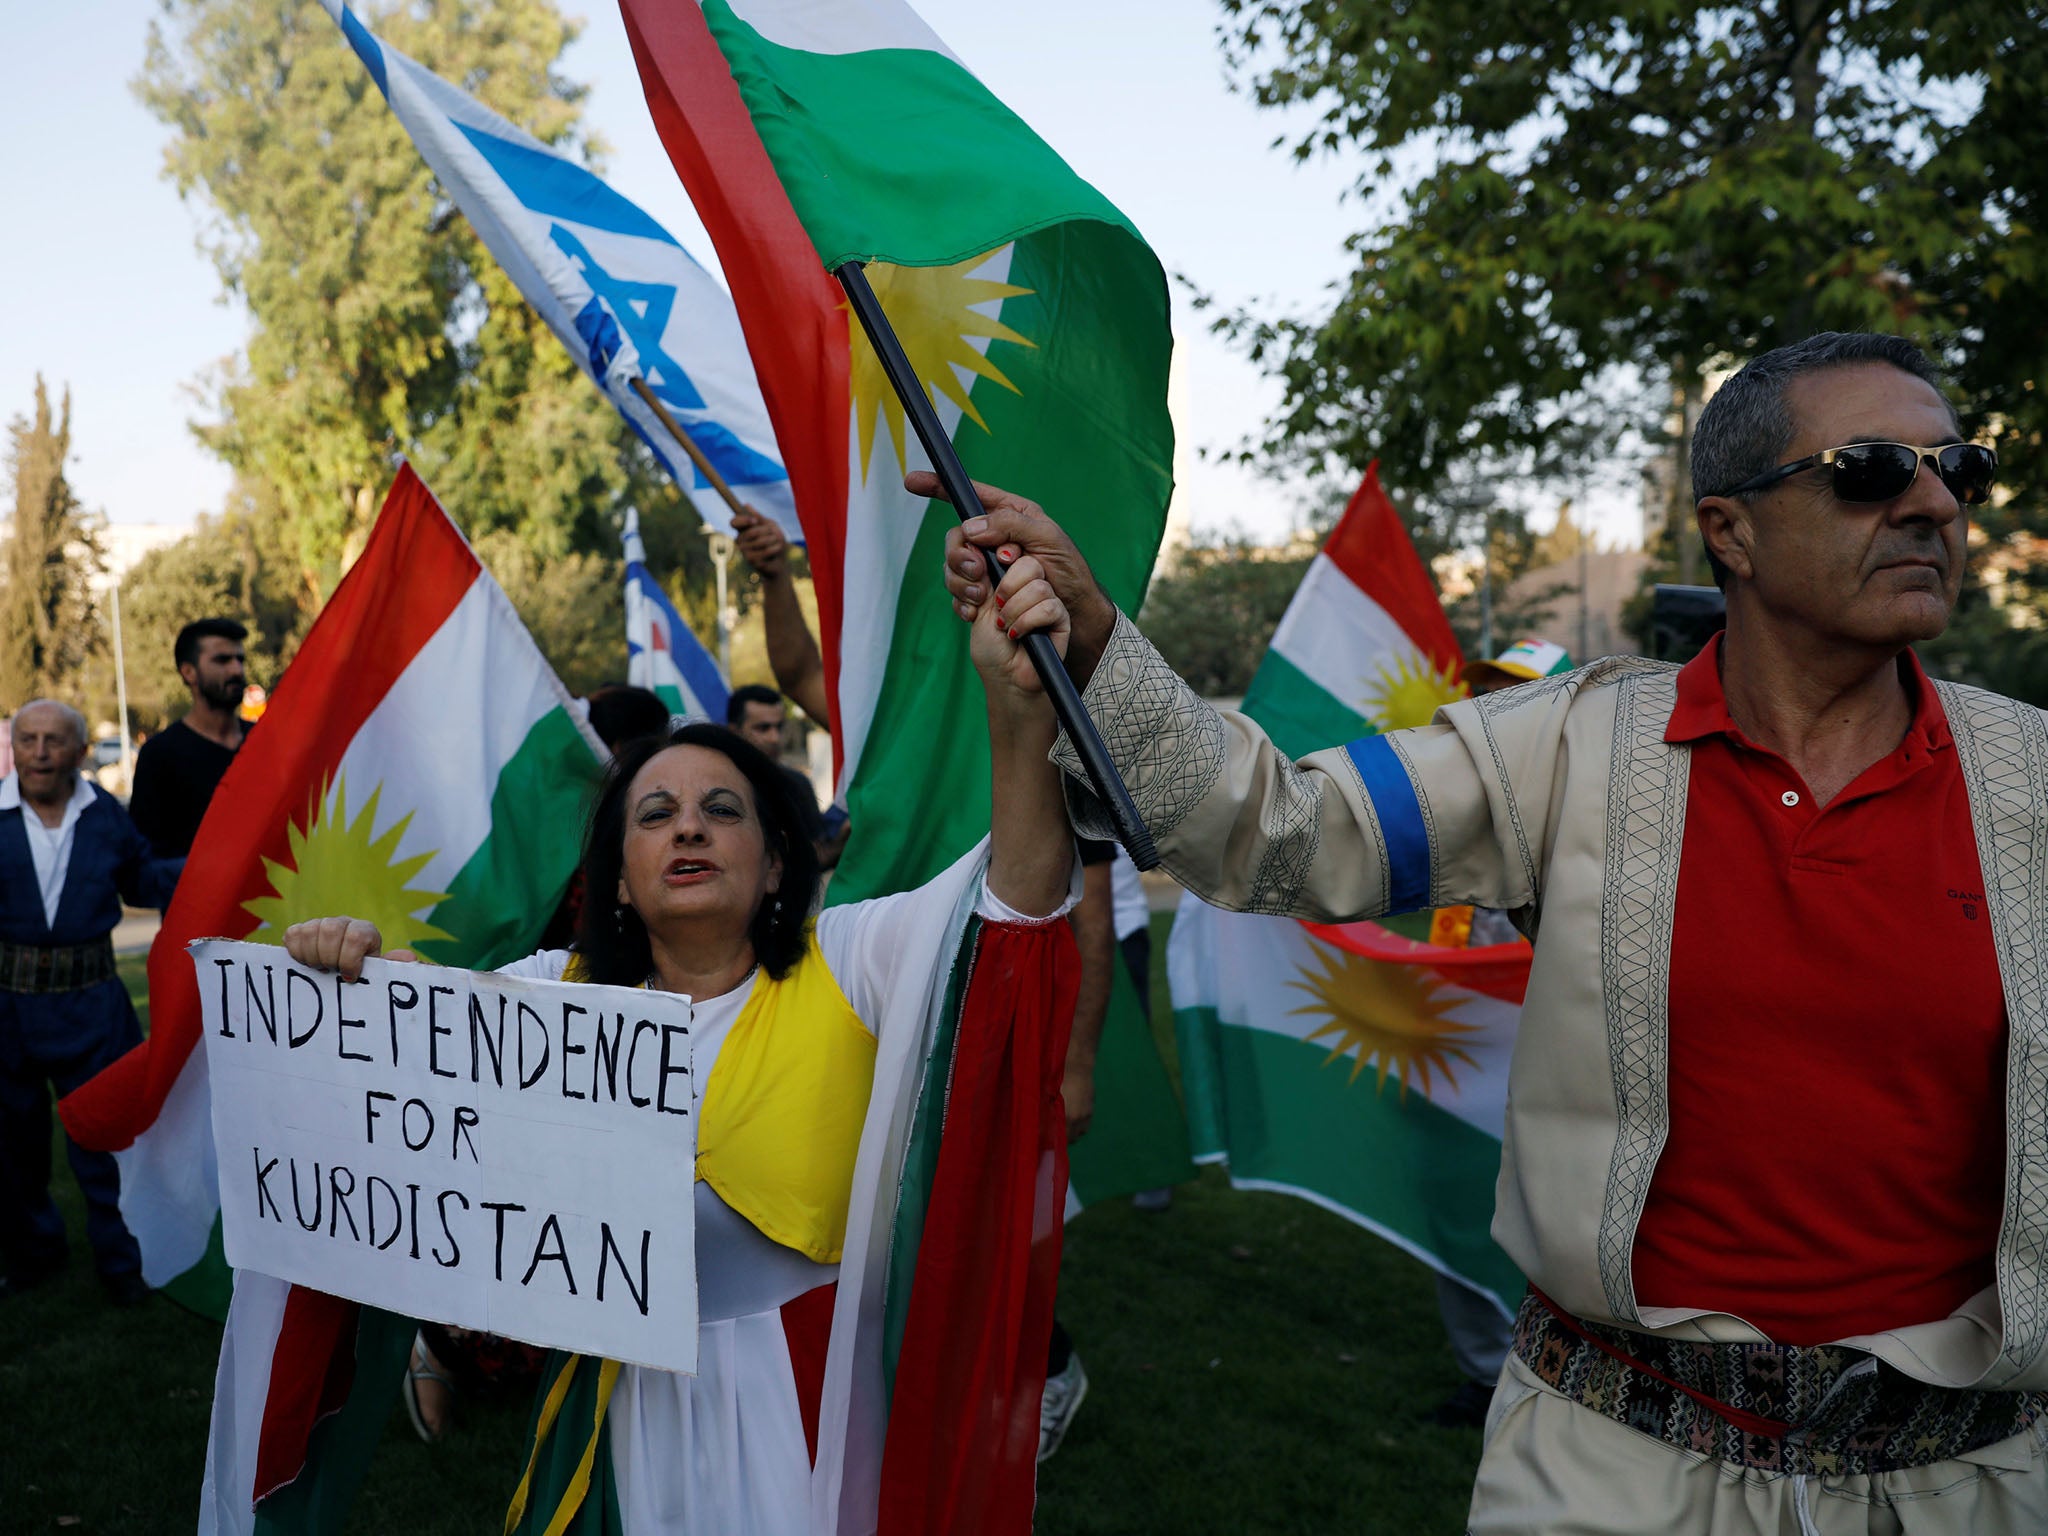 More than 92 per cent of voters in Iraqi Kurdistan backed independence